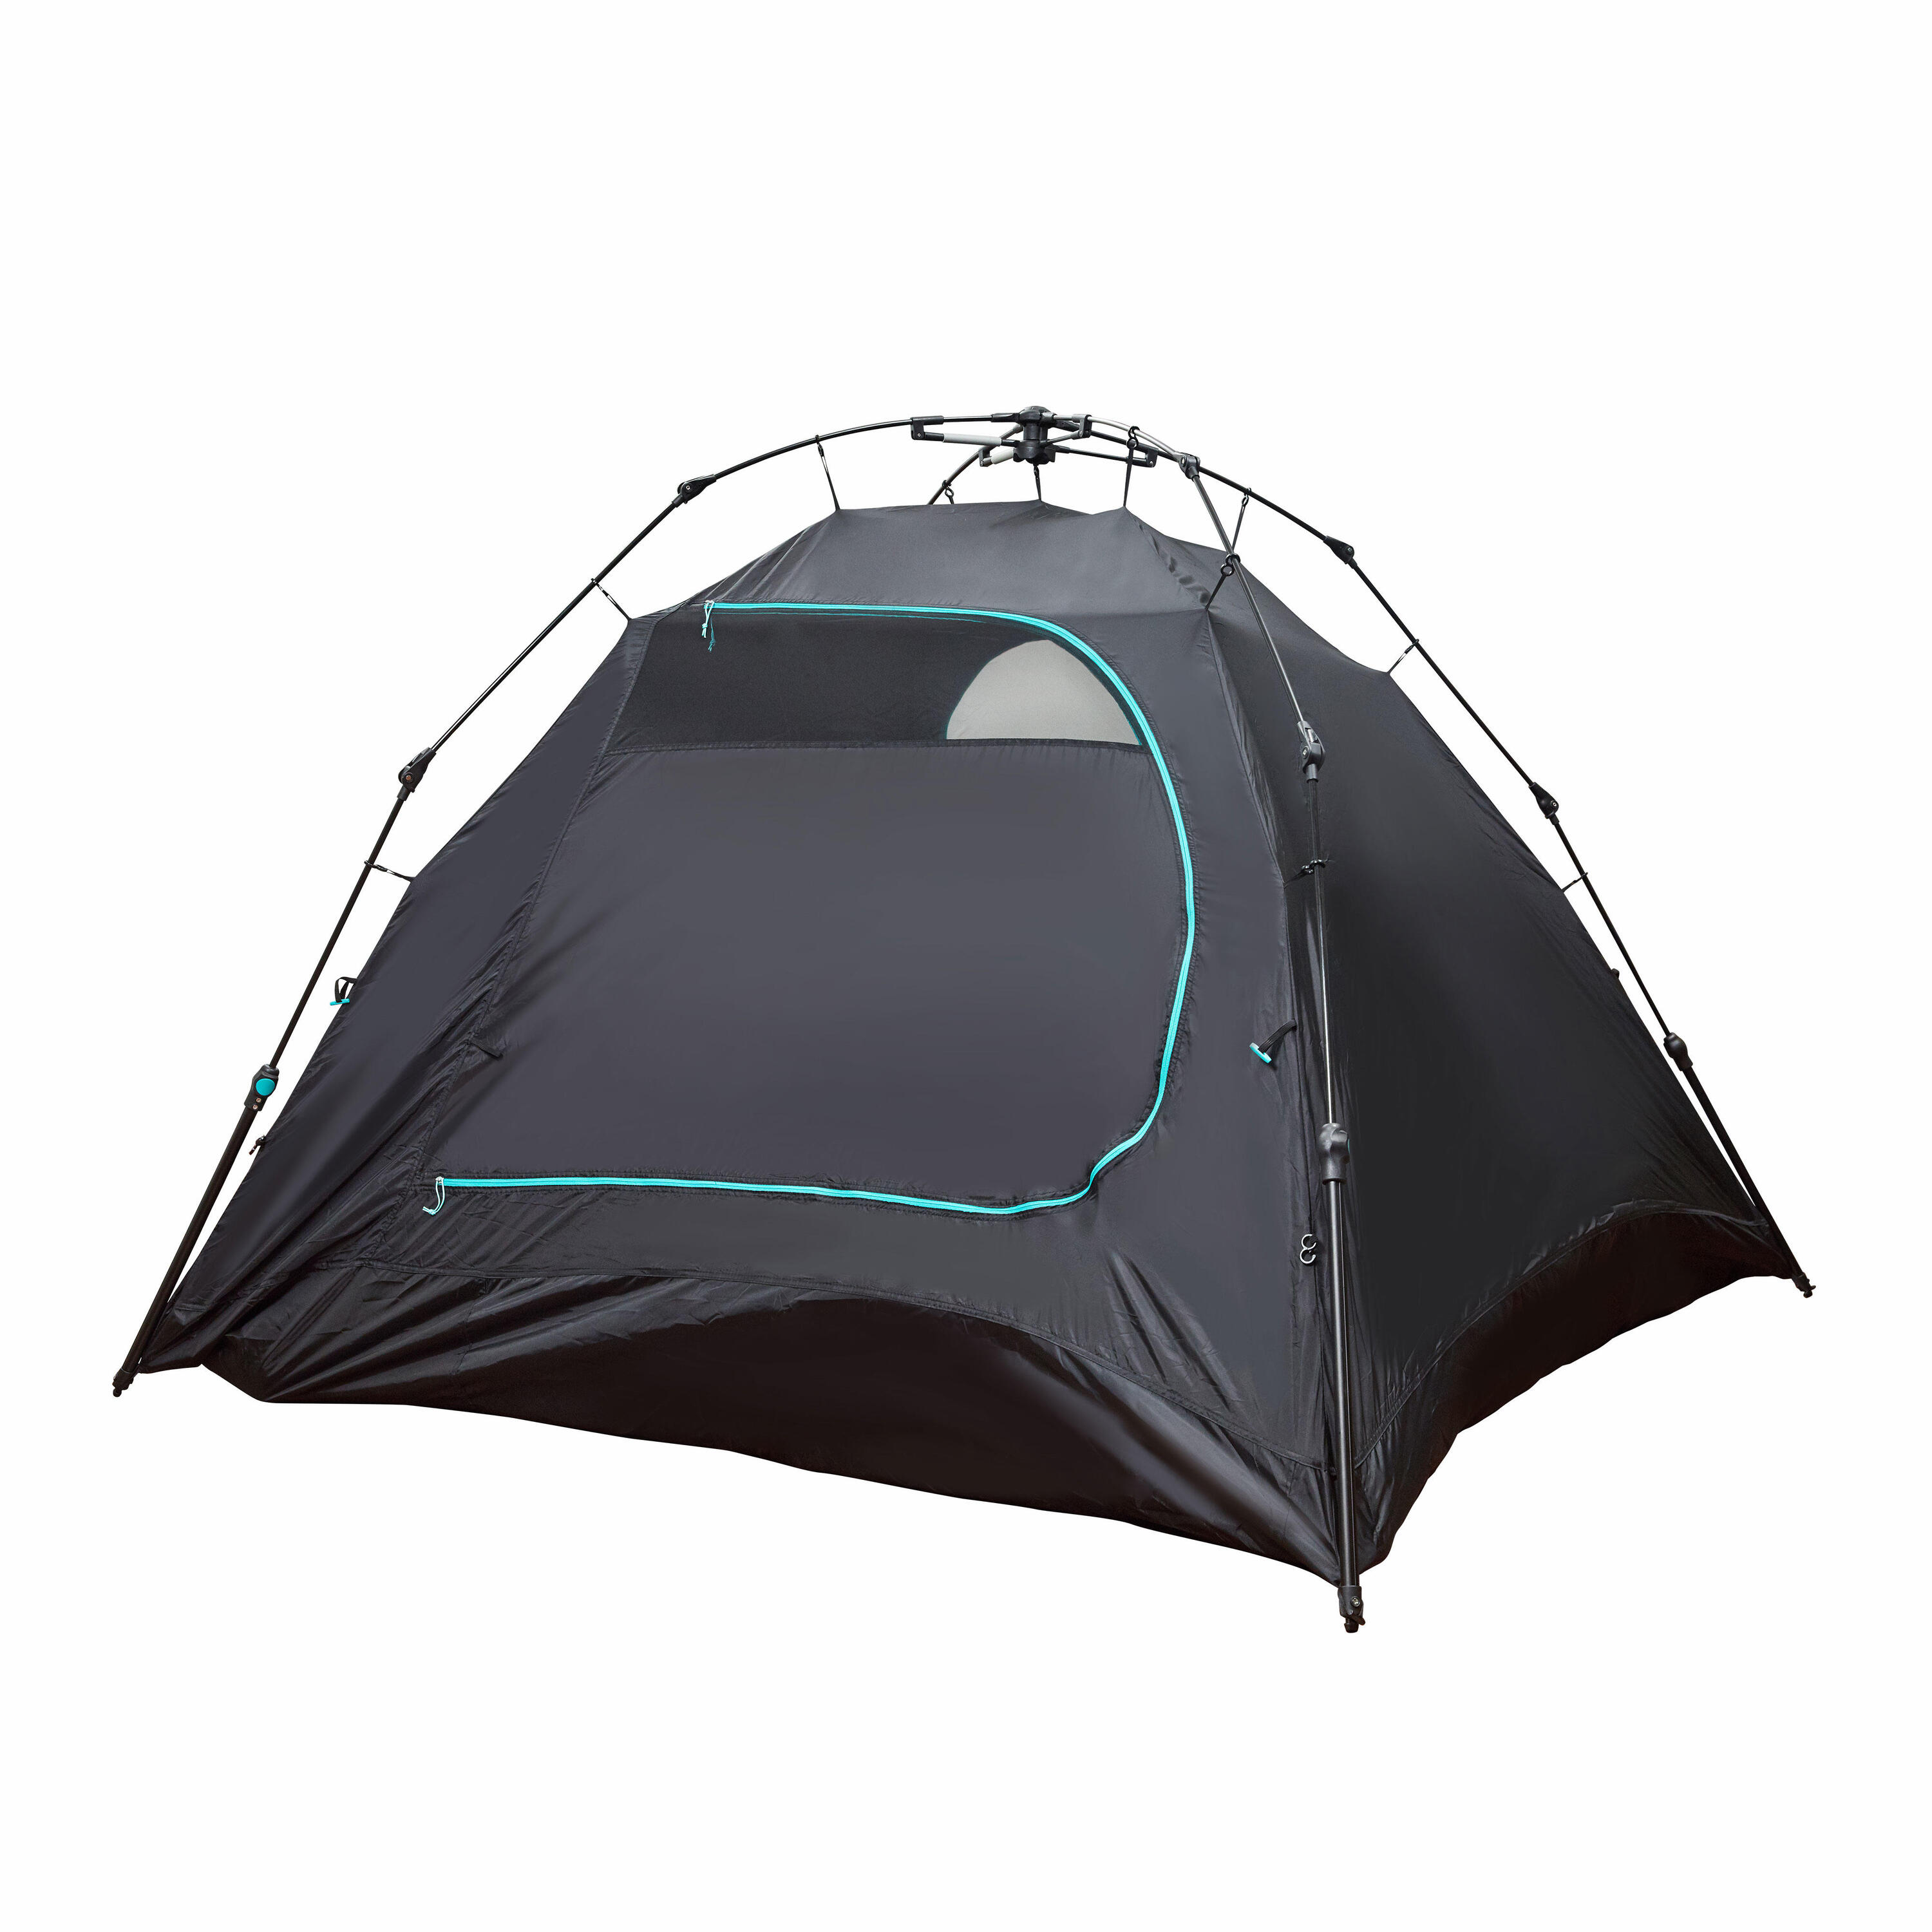 EASY CAMPING TENT ARPENAZ - FRESH&BLACK - 3 PERSON 5/17